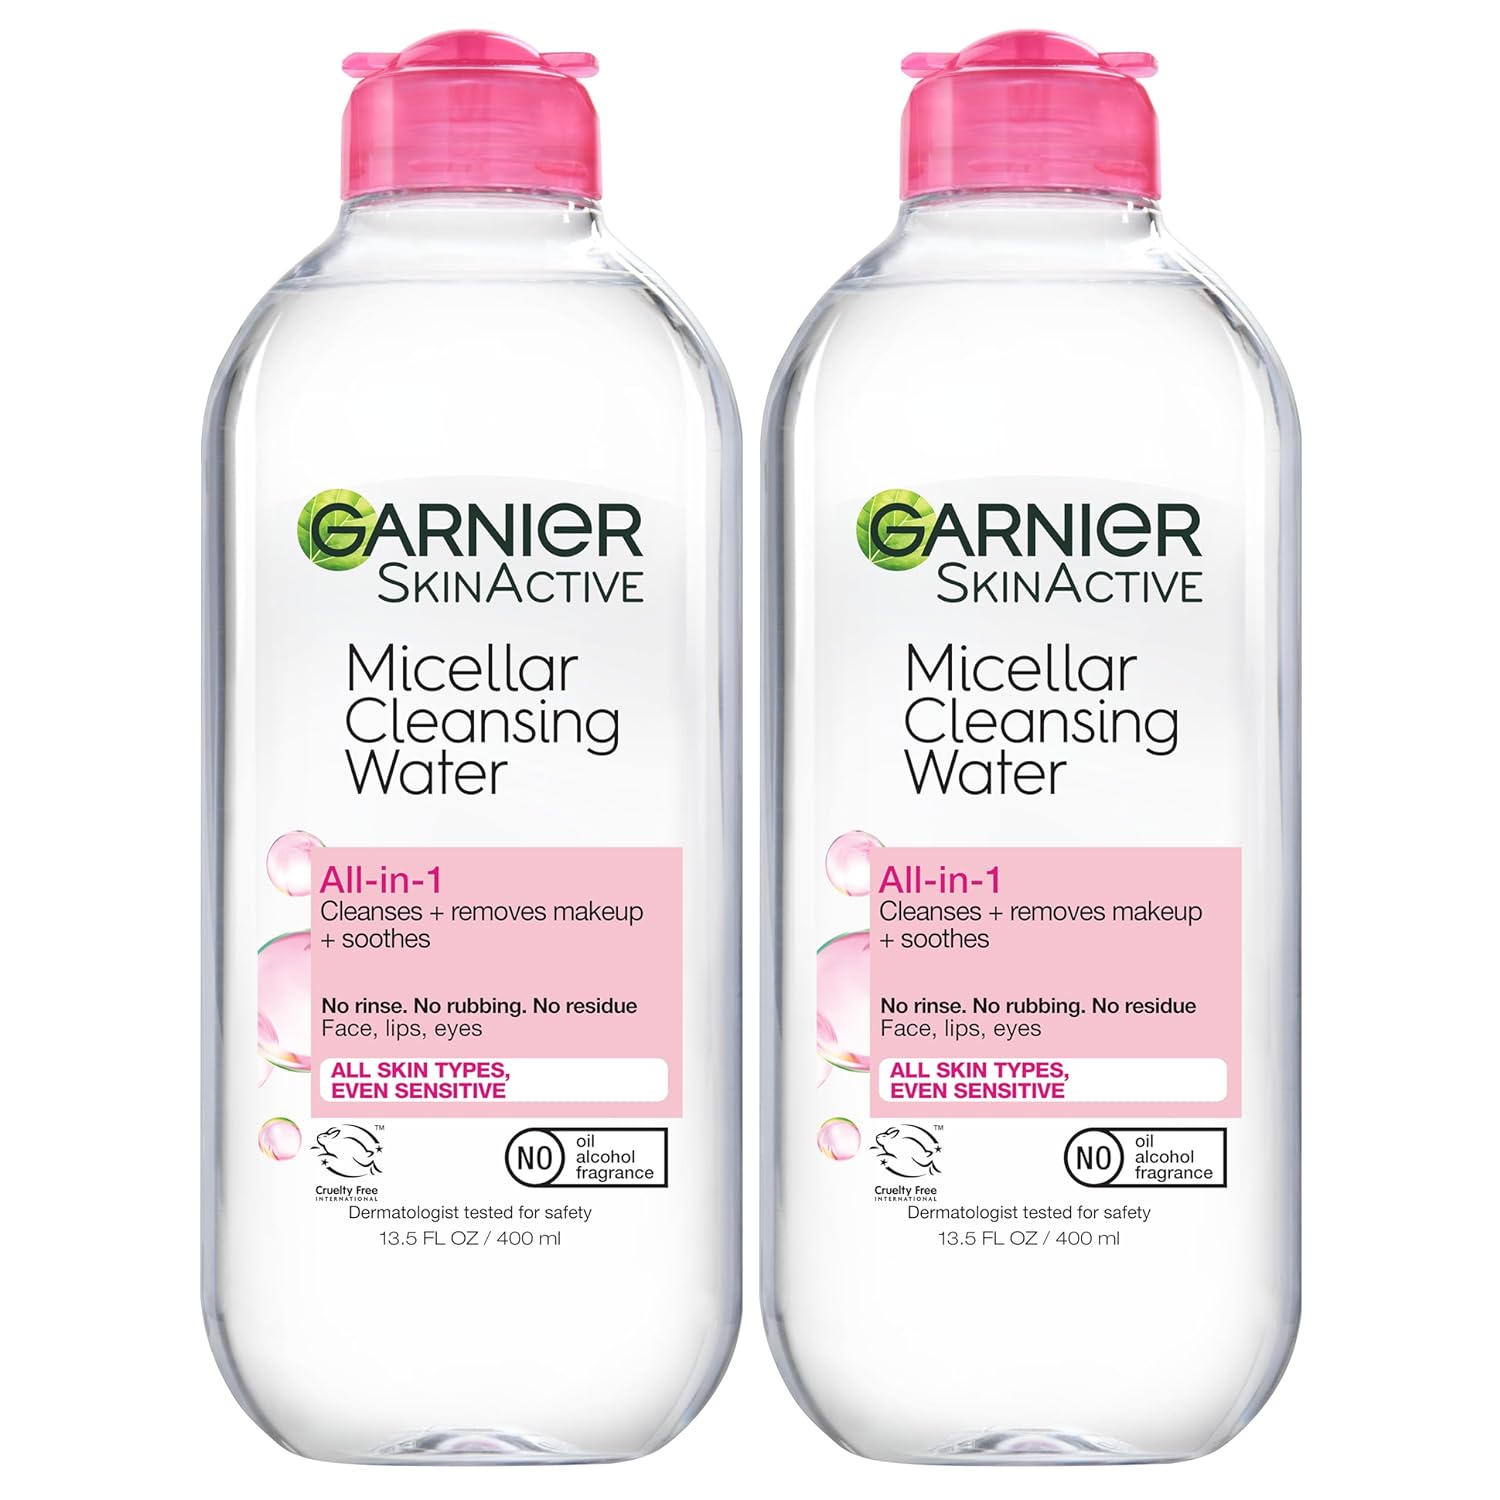 Garnier Micellar Water for All Skin Types, Facial Cleanser & Makeup Remover, 13.5 Fl Oz (400mL), 2 Count (Packaging May Vary)